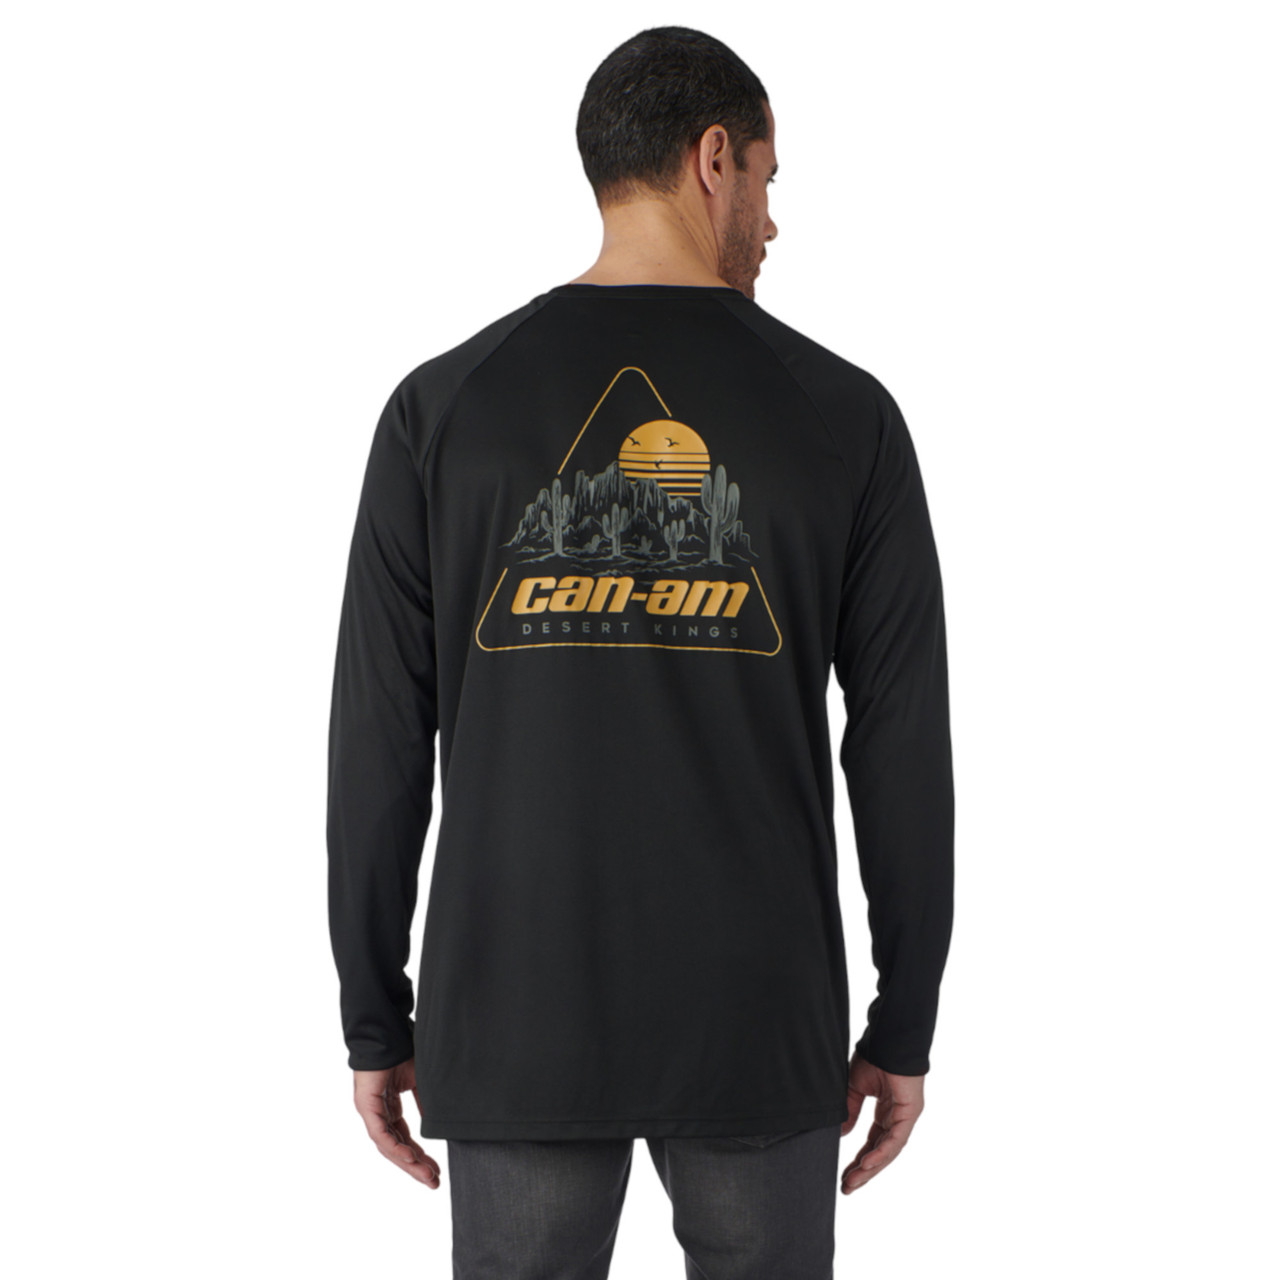 Can-Am New OEM, Men's 2XL Branded Cotton Performance LS Tee, 4547641490